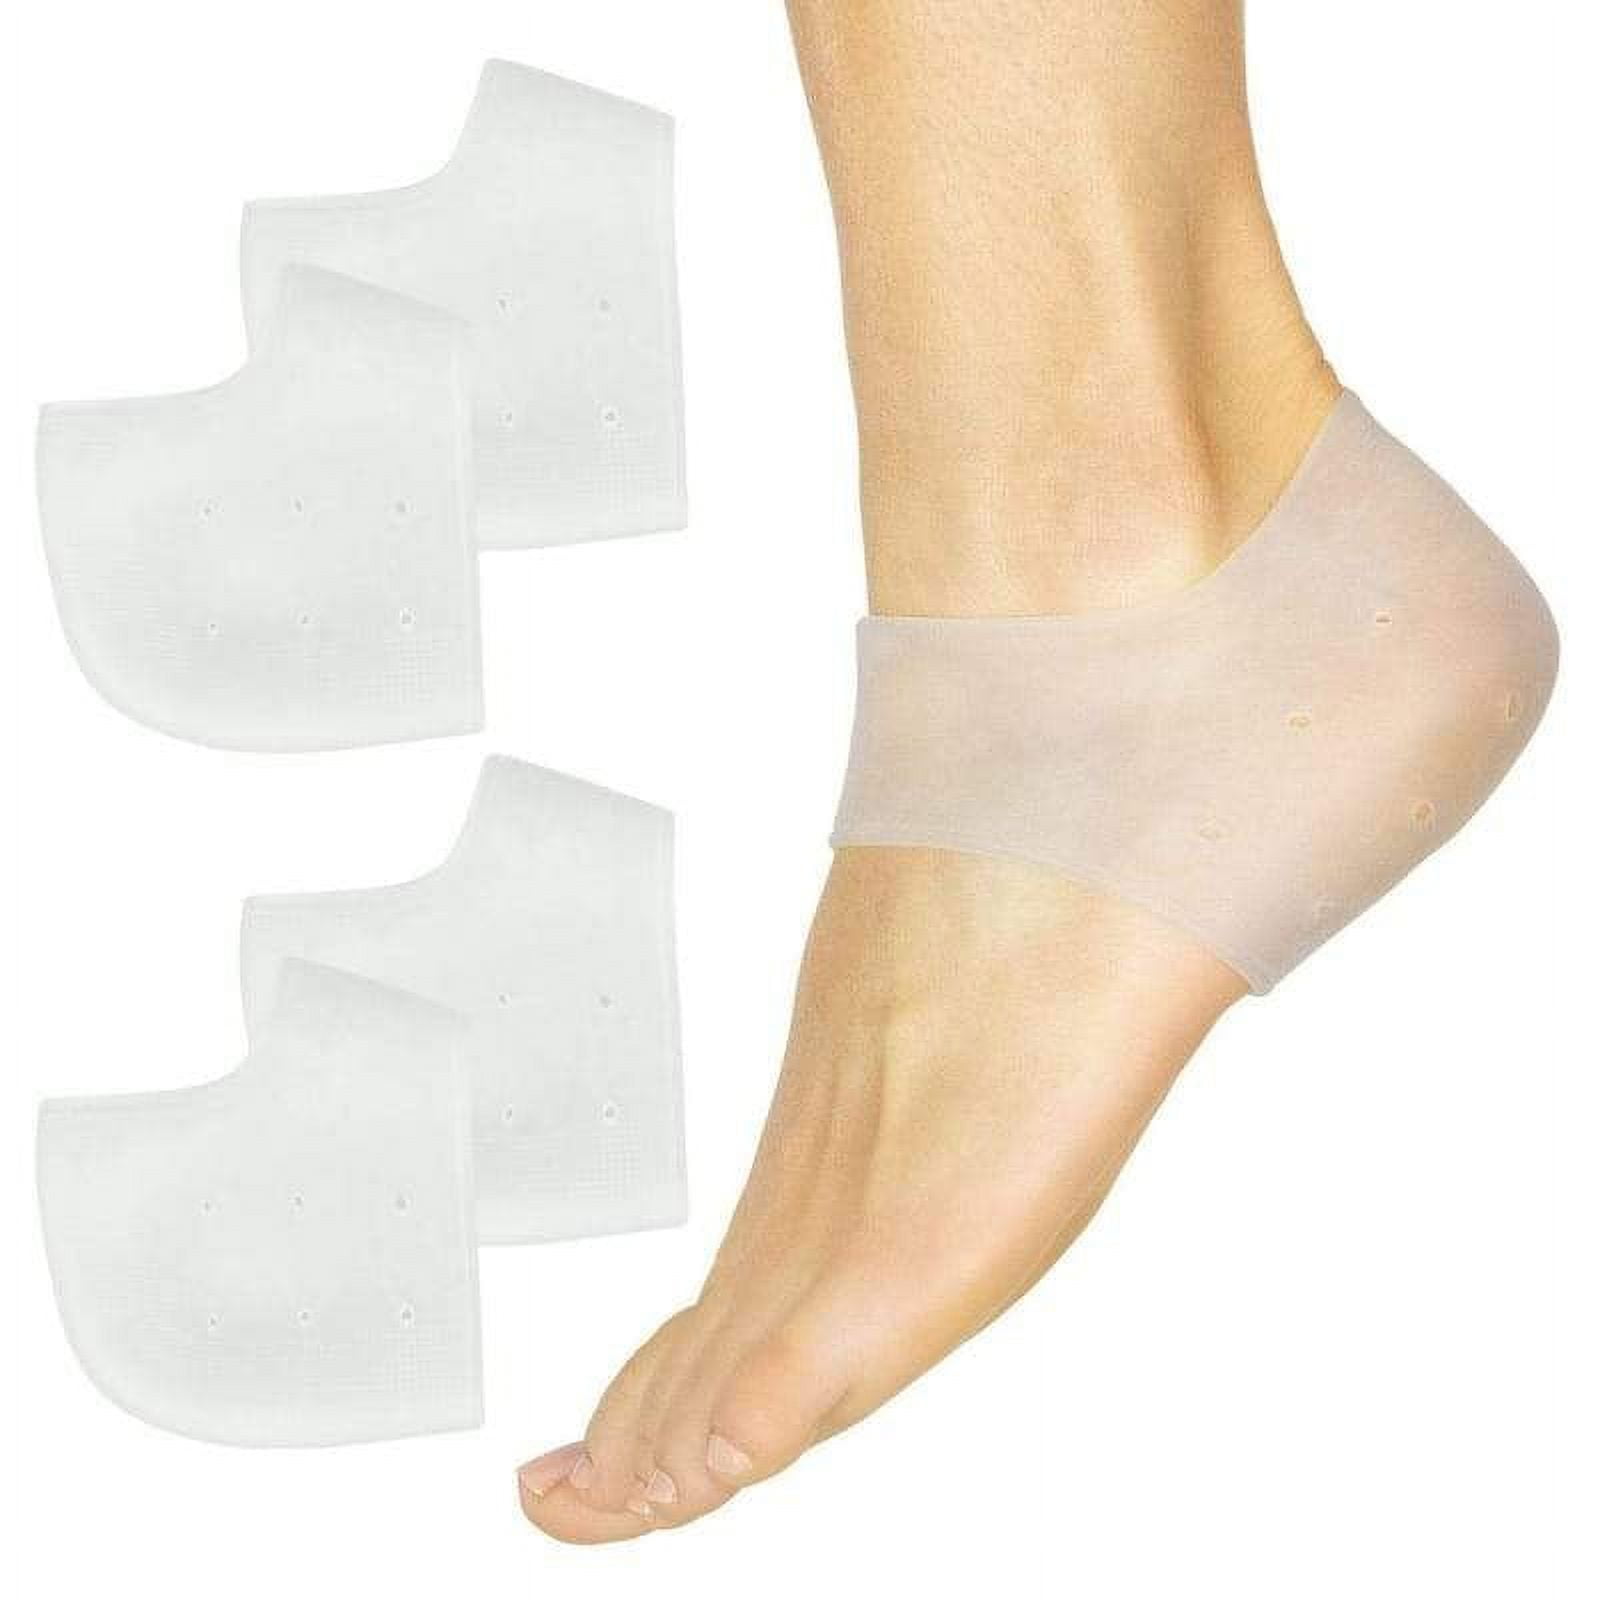 Buy Cheshta Soft Silicon Gel Half Toe Sleeve Forefoot Pads for Pain Relief  Heel Front Socks Silicone Gel Socks (Skin Color) Online at Lowest Price  Ever in India | Check Reviews &